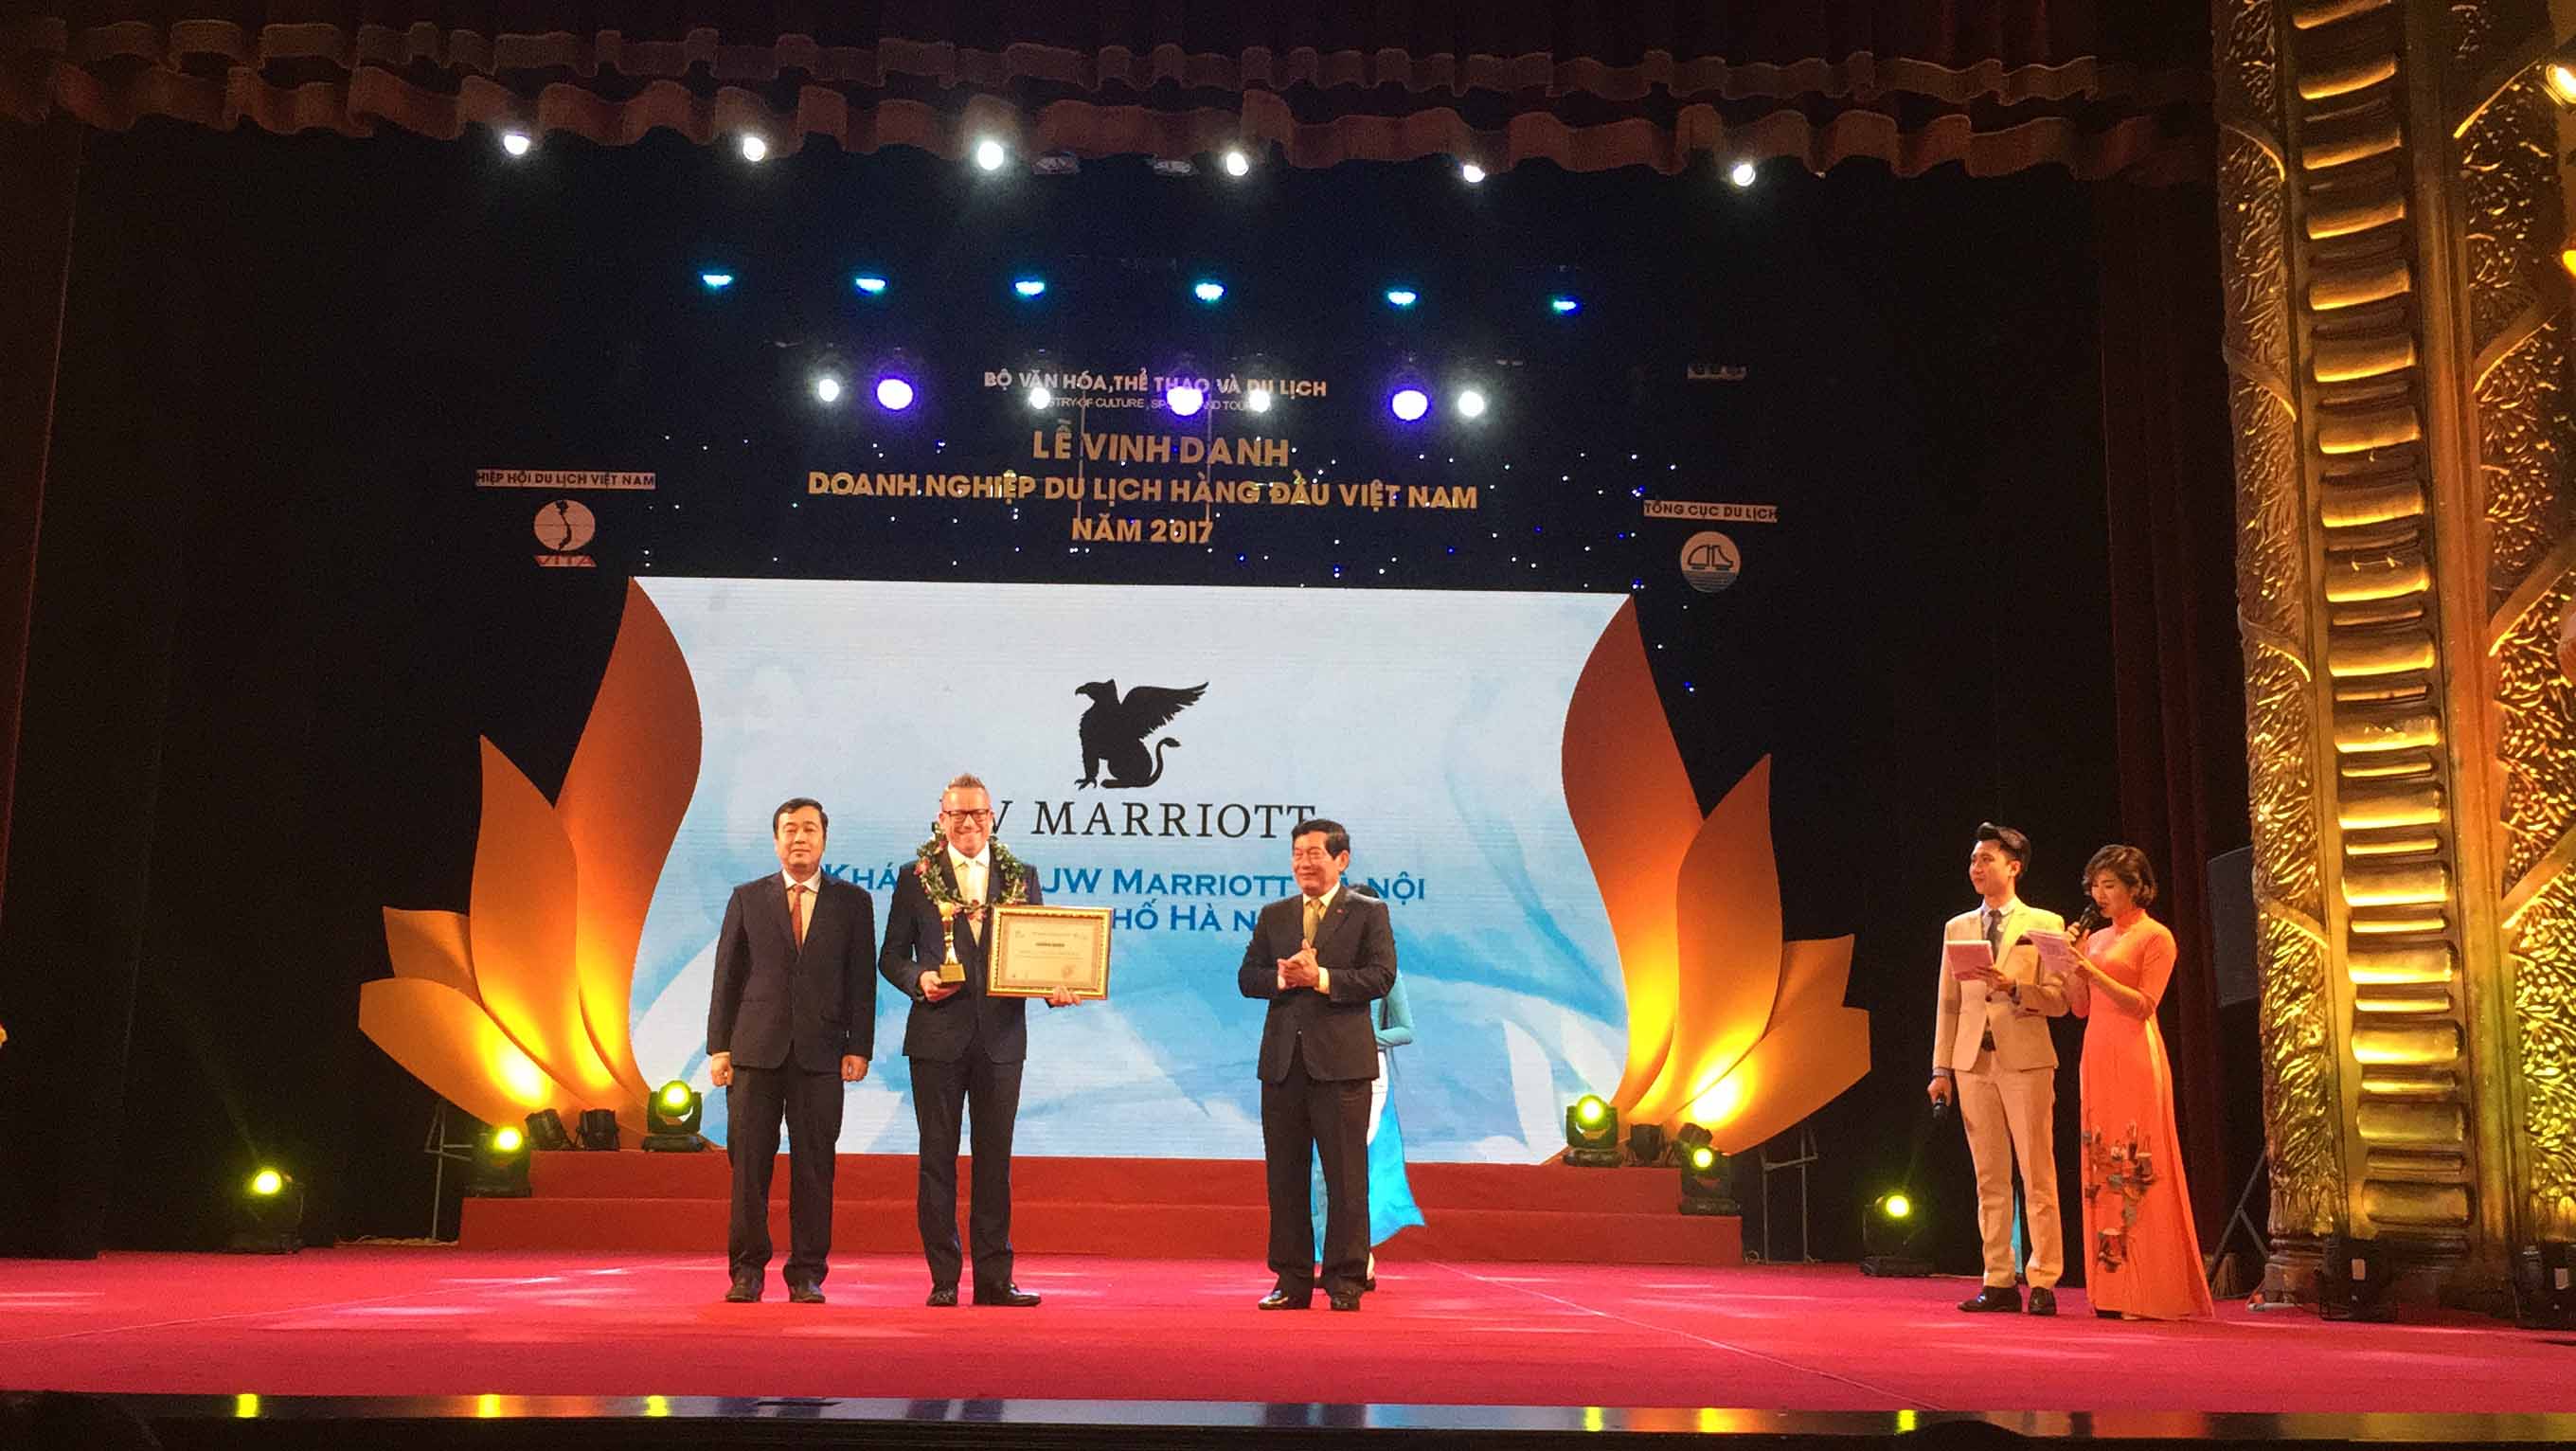 paul-dunn-u-director-of-sales-and-marketing-honored-to-receive-the-1st-rank-in-top-ten-5-star-hotels-in-vietnam-award